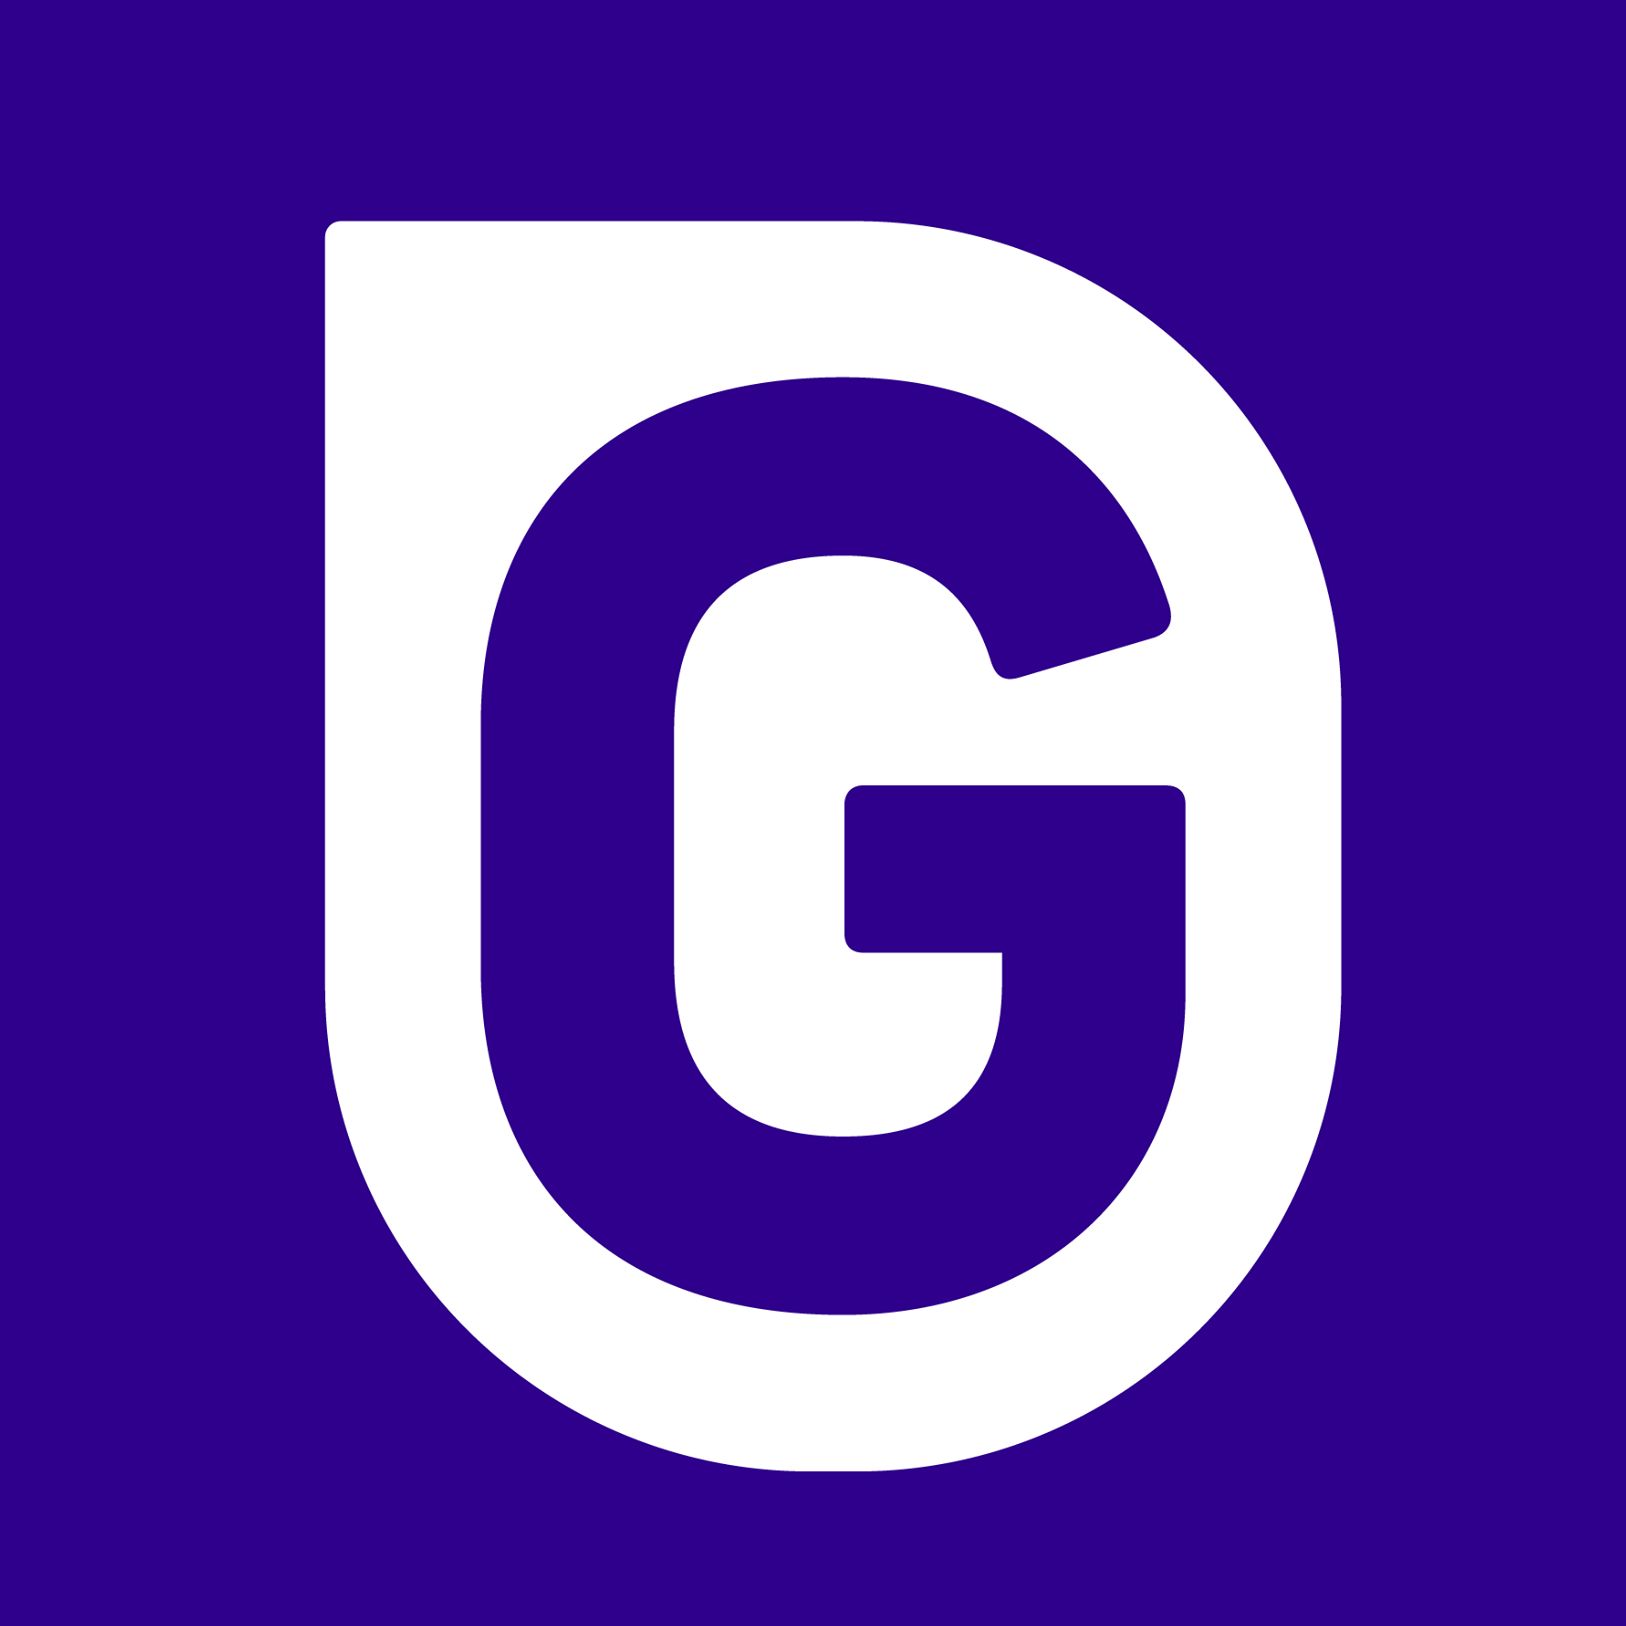 A large capital G in purple on a white background